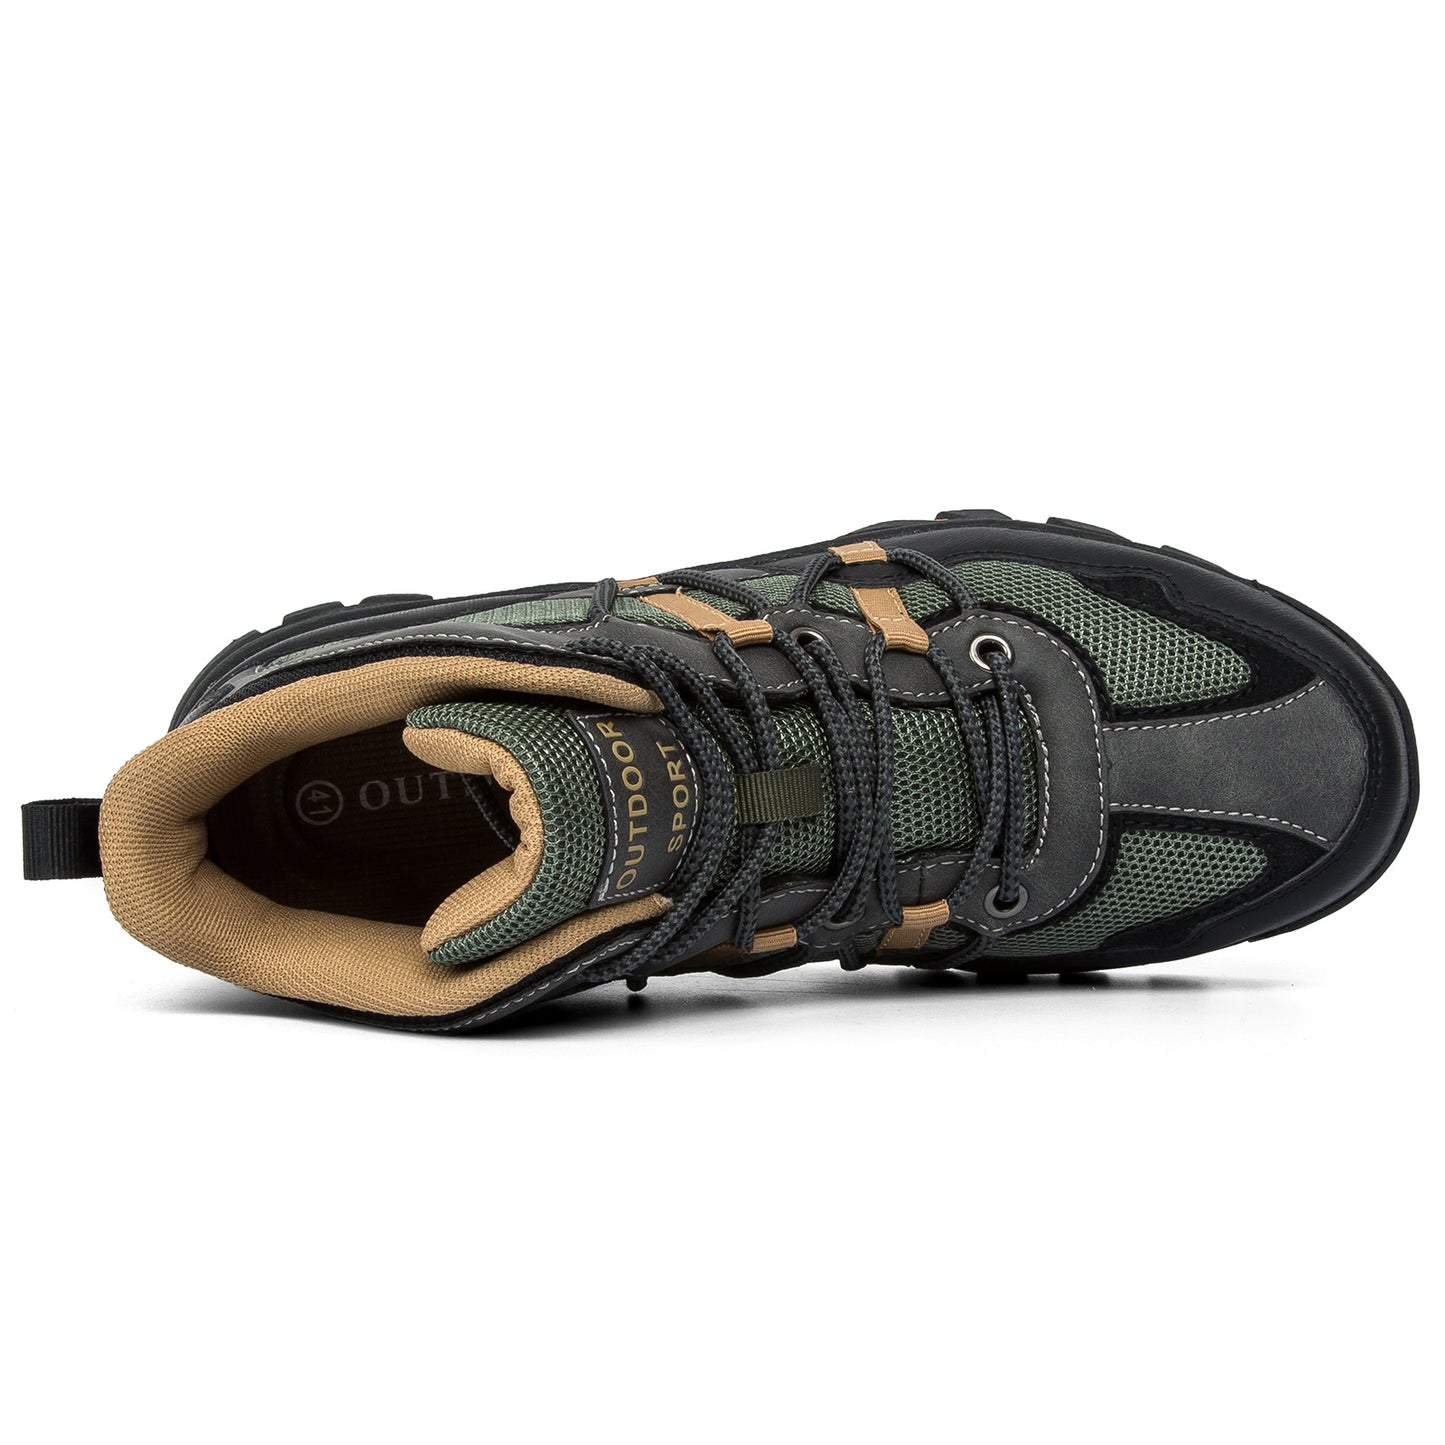 Men's Camping Outdoor Walking Hiking Trail Shoes Army Green | 762